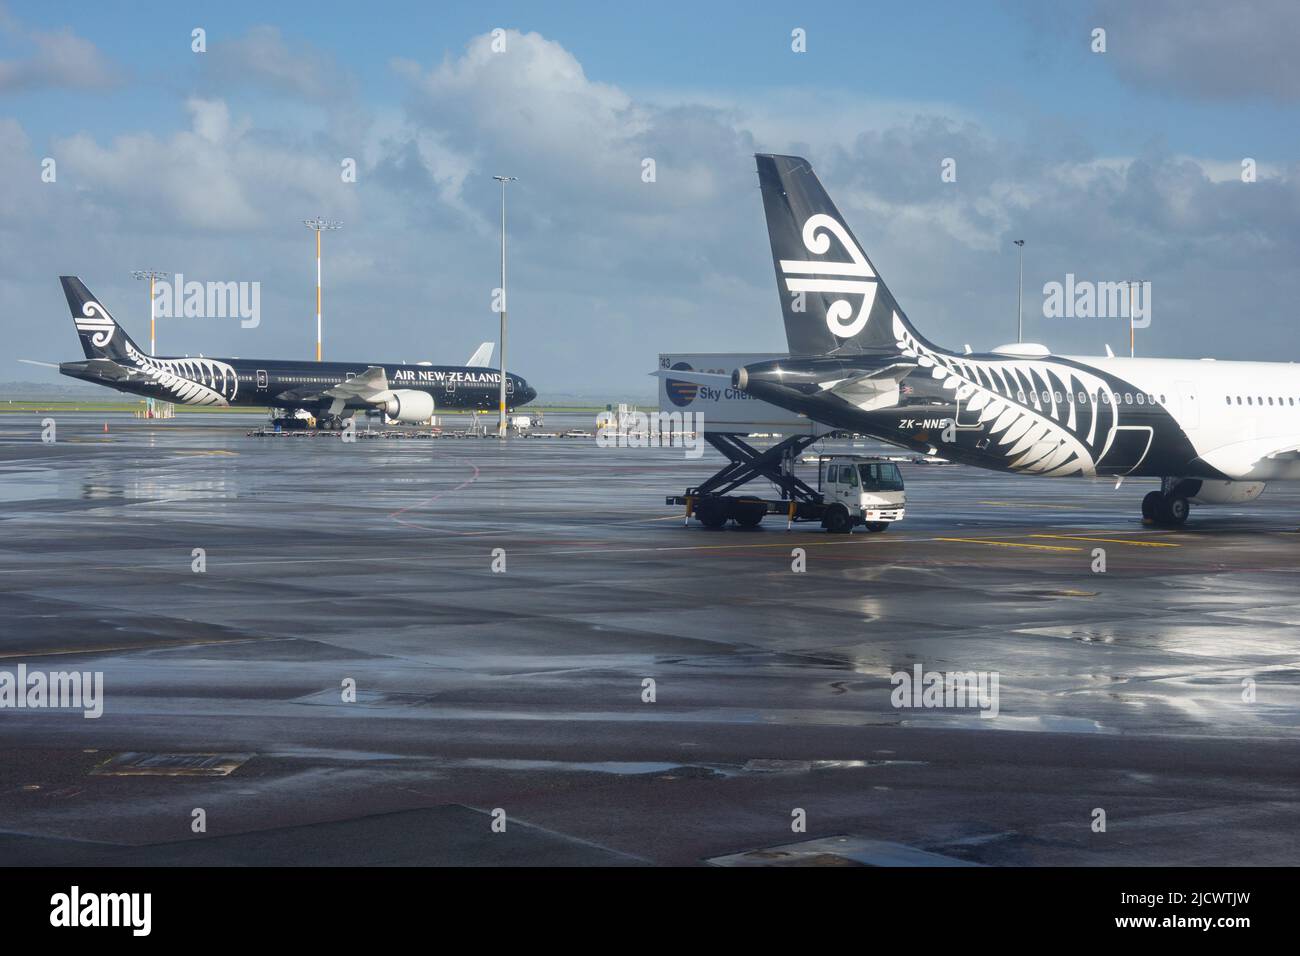 Auckland New Zealand - June 13 2022: White and black Air New zealand planes parked on tarmac. at Auckland Airport after rain. Stock Photo